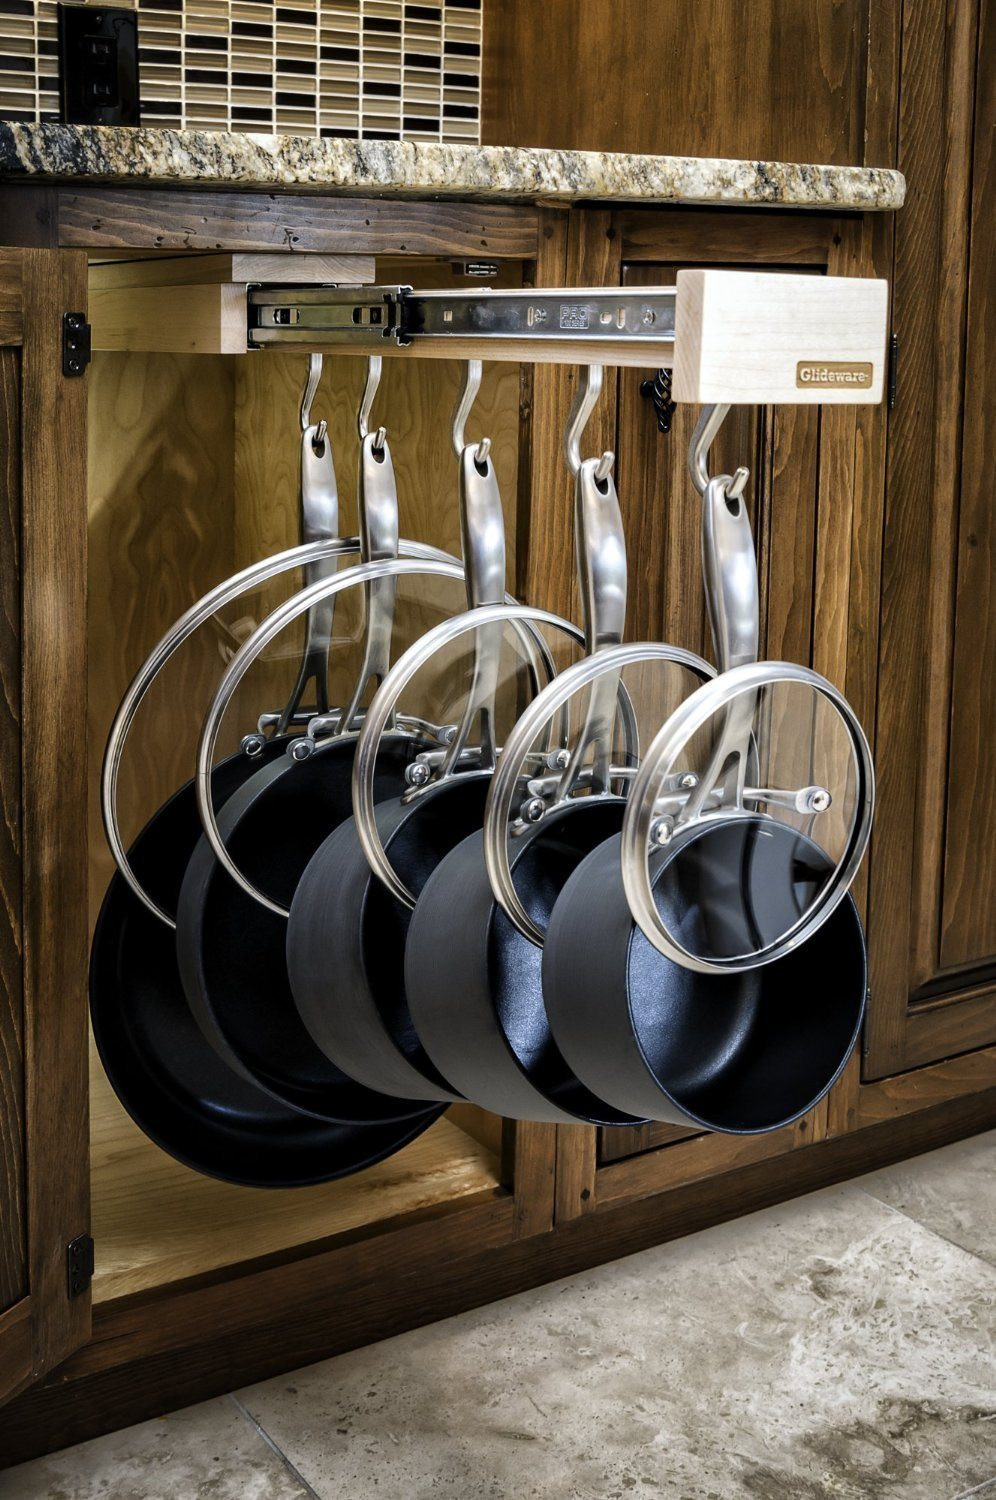 Kitchen Pots And Pans Organizer
 The Best Tool For Storing Pots And Pans Simplemost